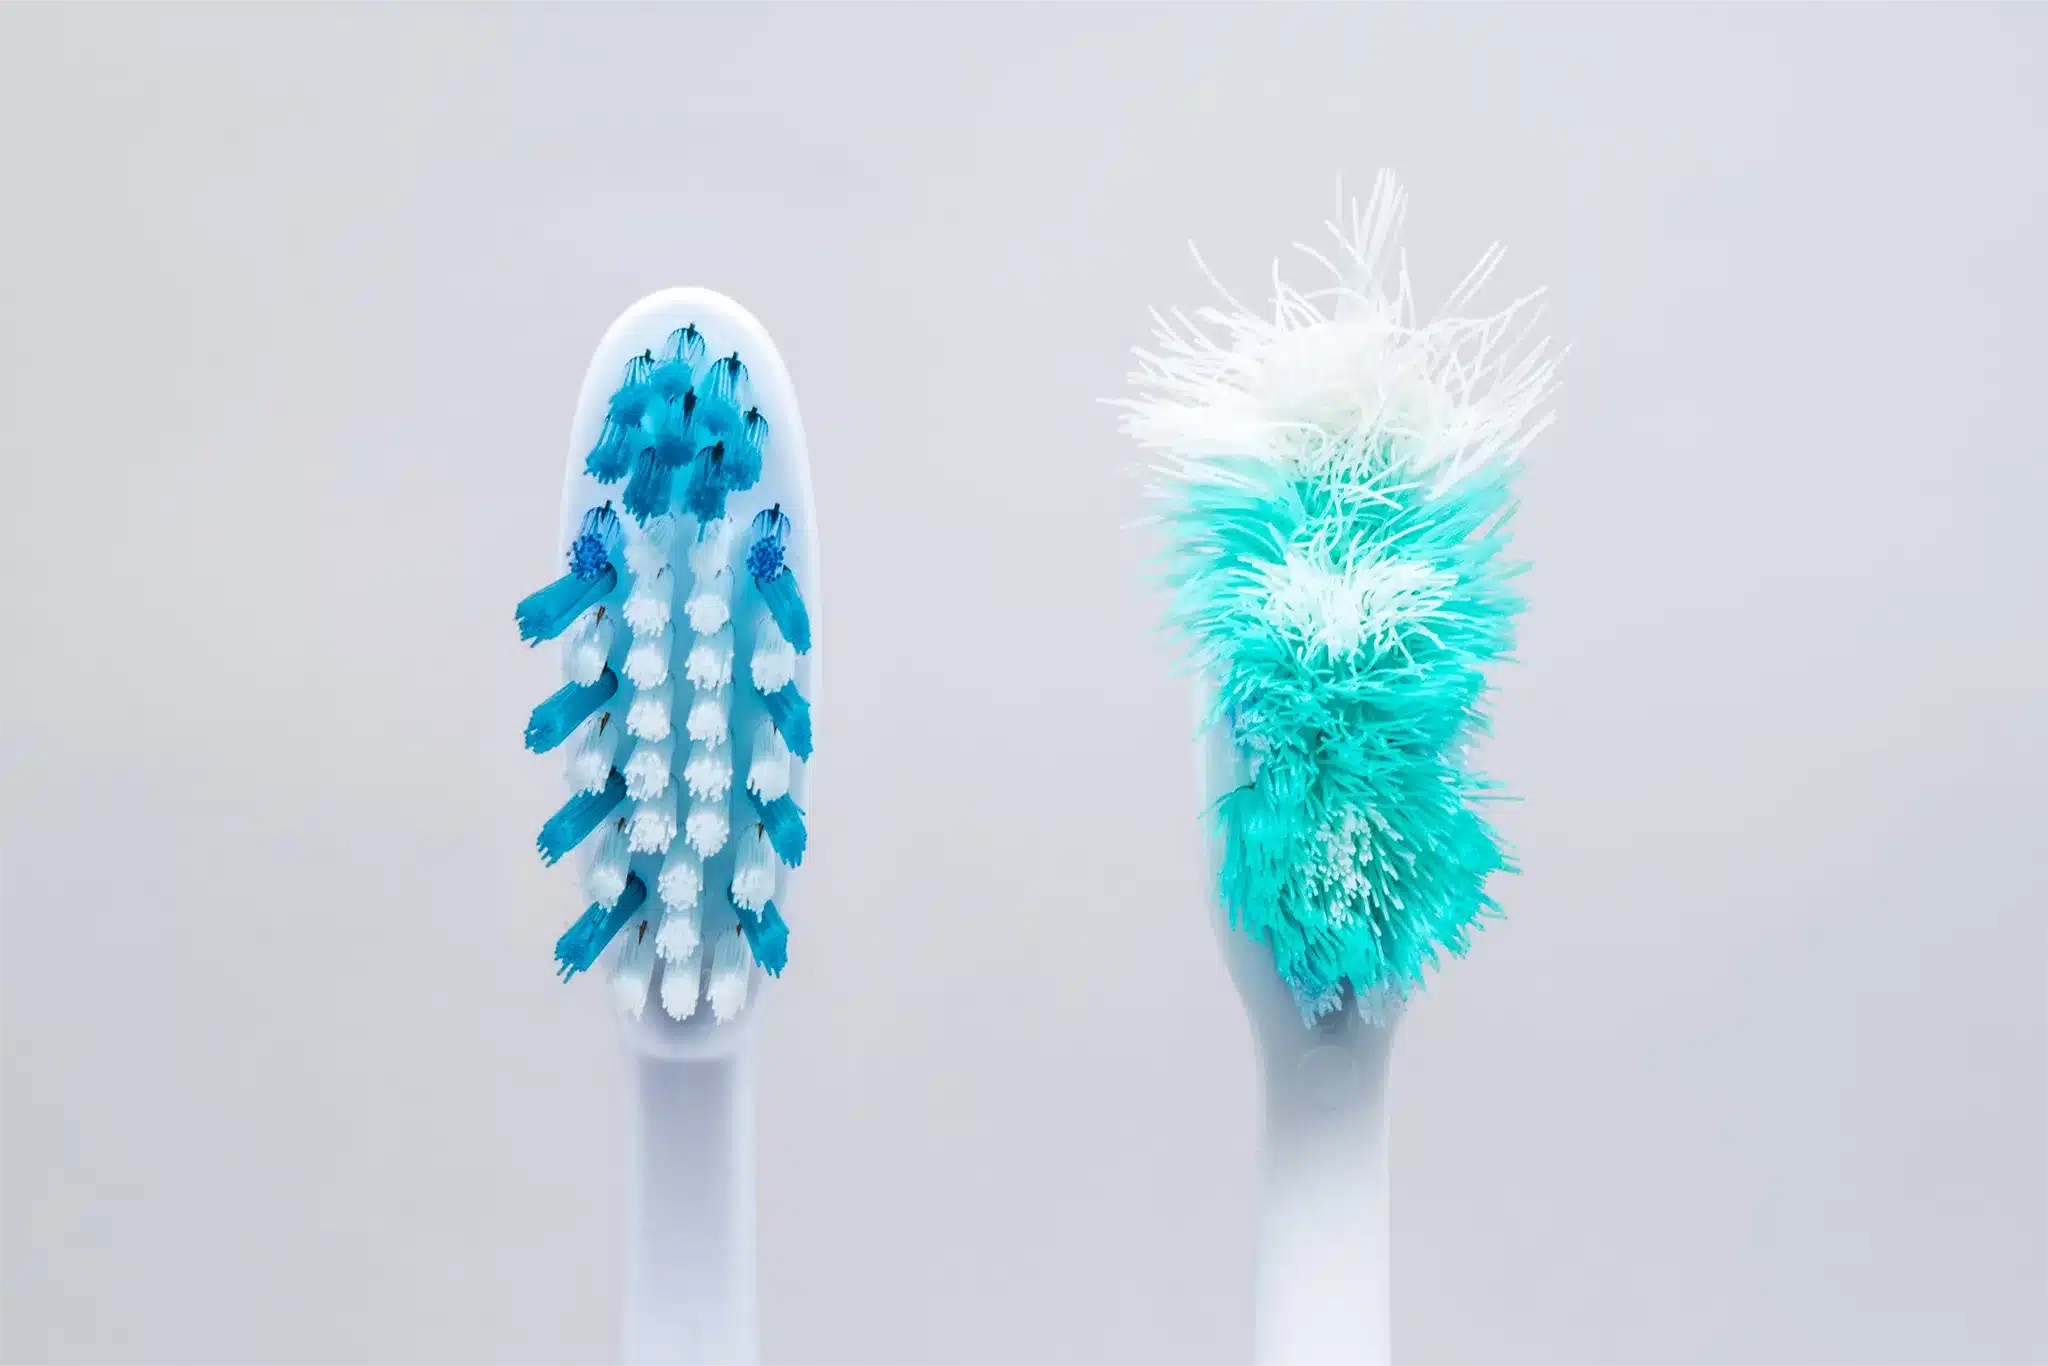 A picture of a new toothbrush and an old toothbrush.